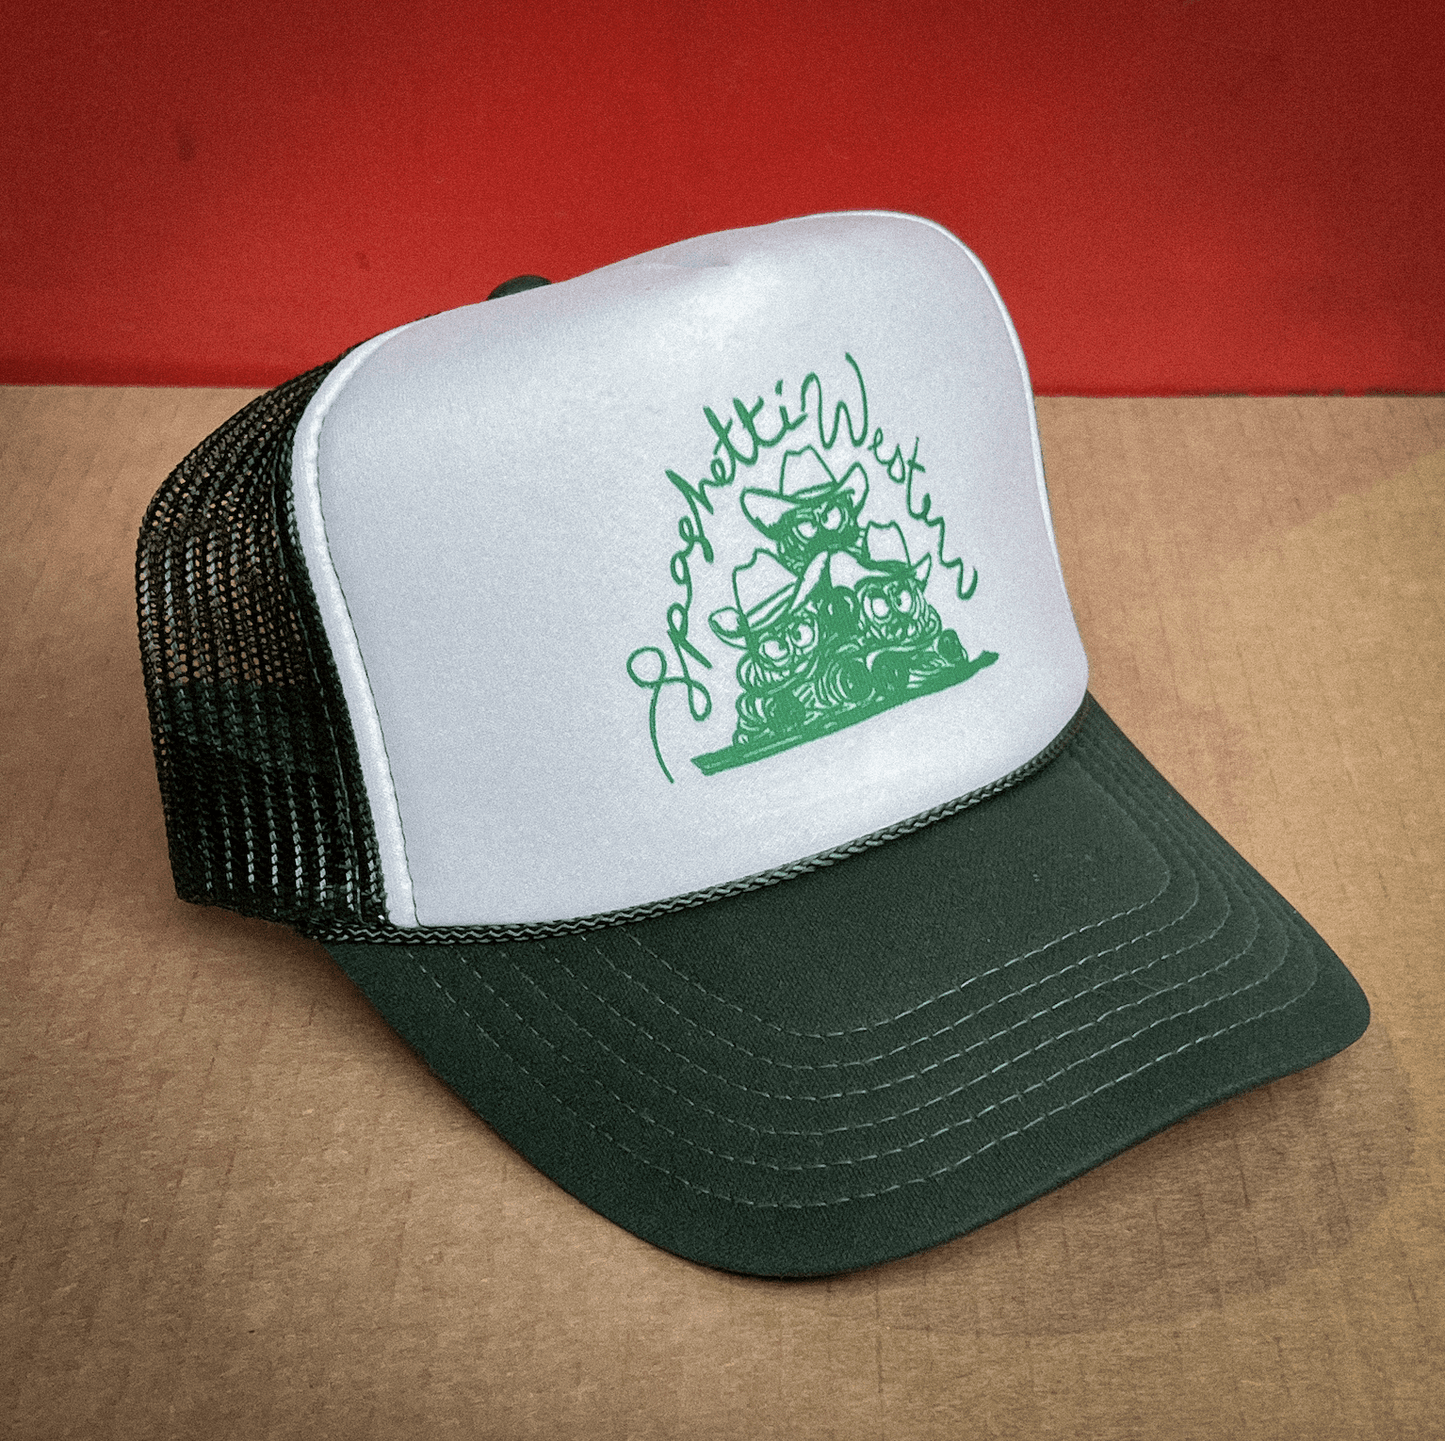 "Spaghetti Western" Trucker Hat in Green/White - Intrigue Ink Visit Bozeman, Unique Shopping Boutique in Montana, Work from Home Clothes for Women